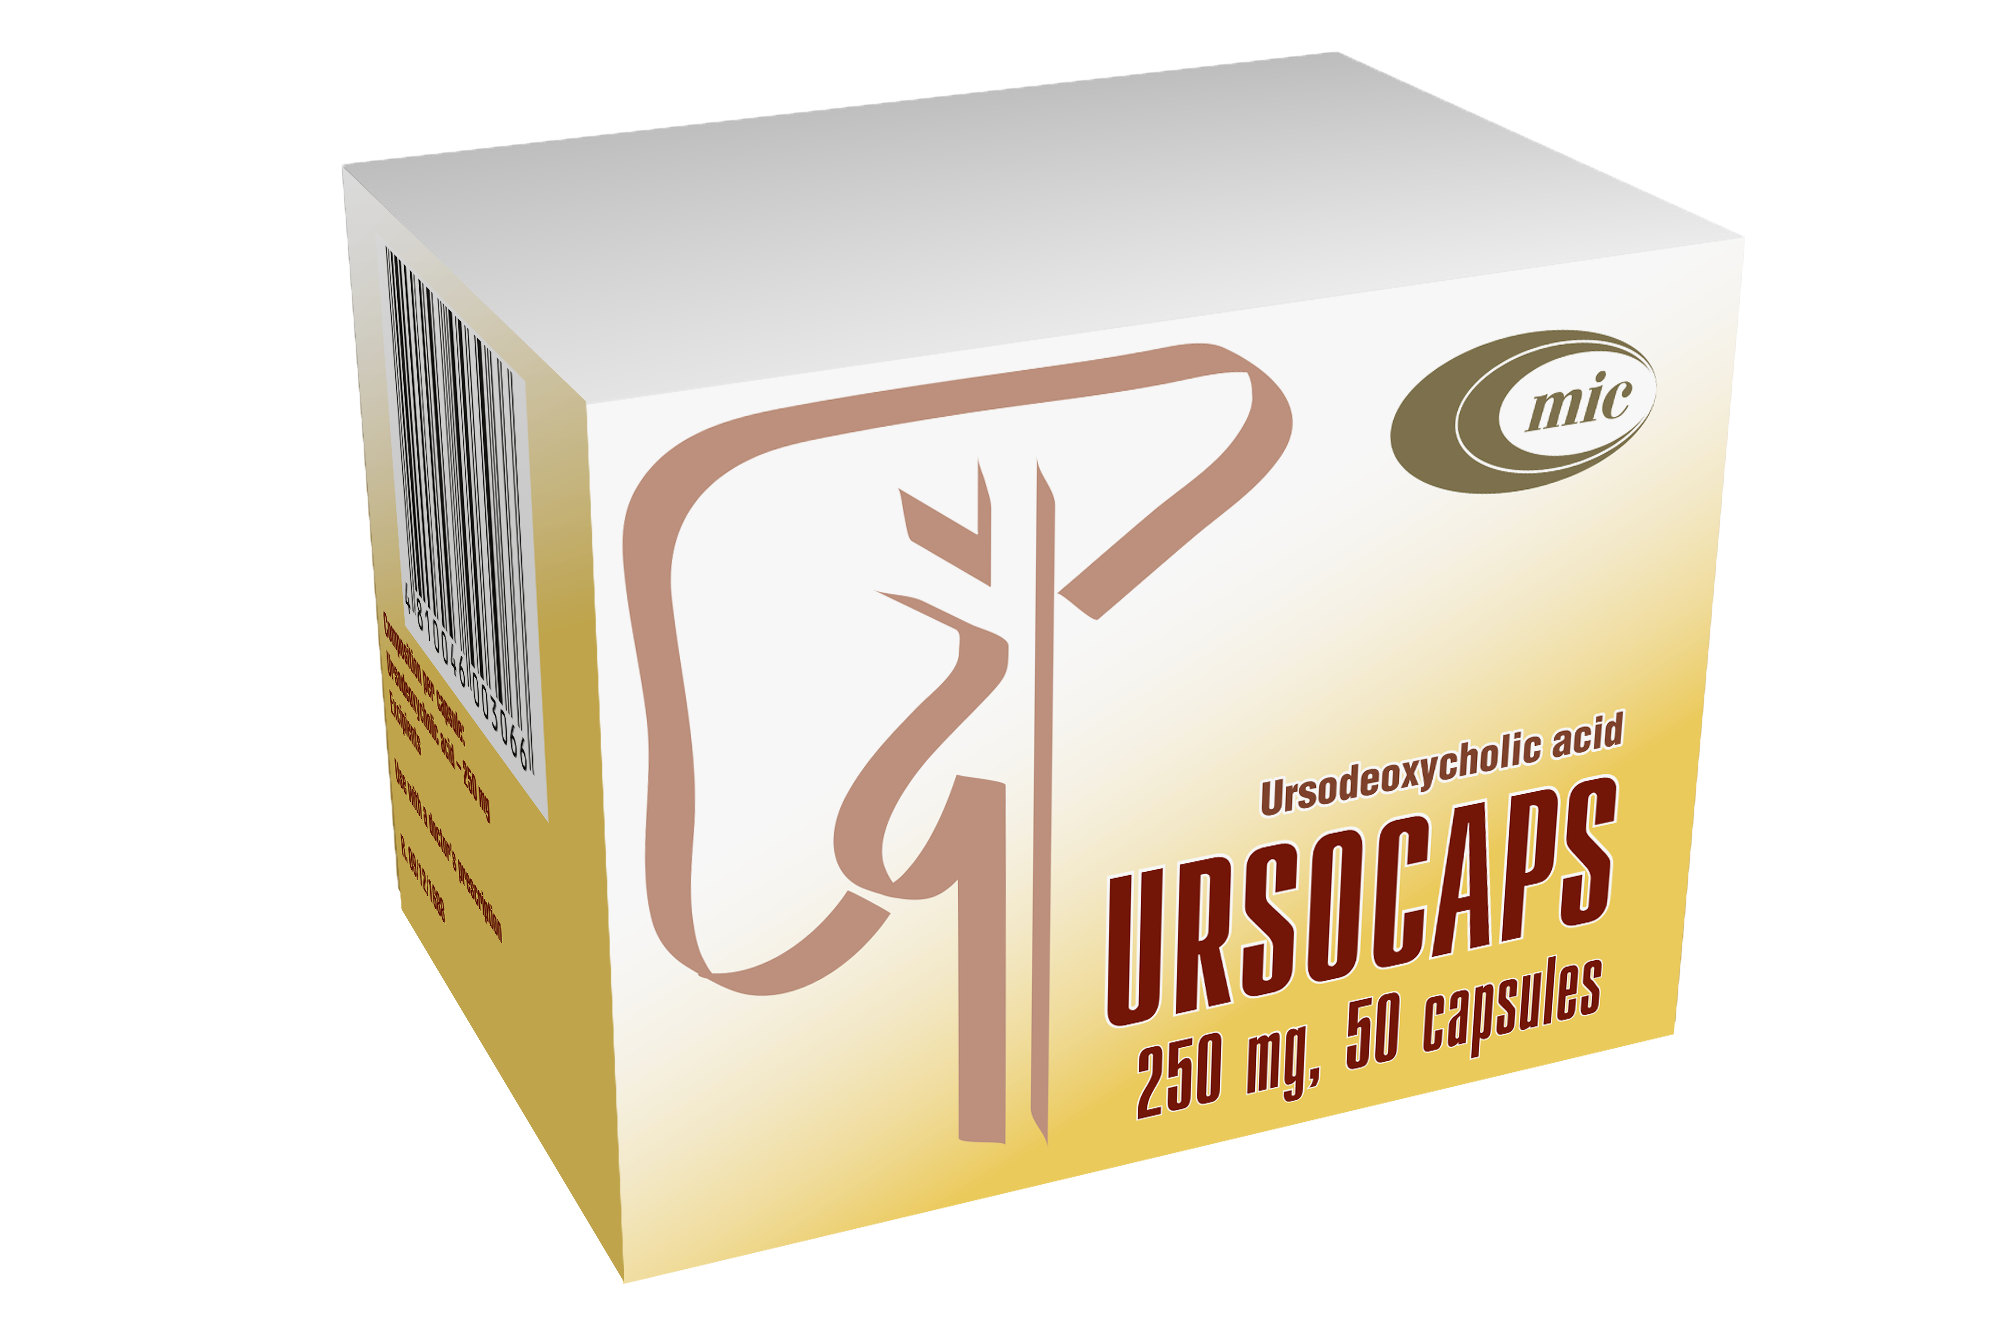 Ursocaps - Effective Medicine for the Treatment of Liver Diseases